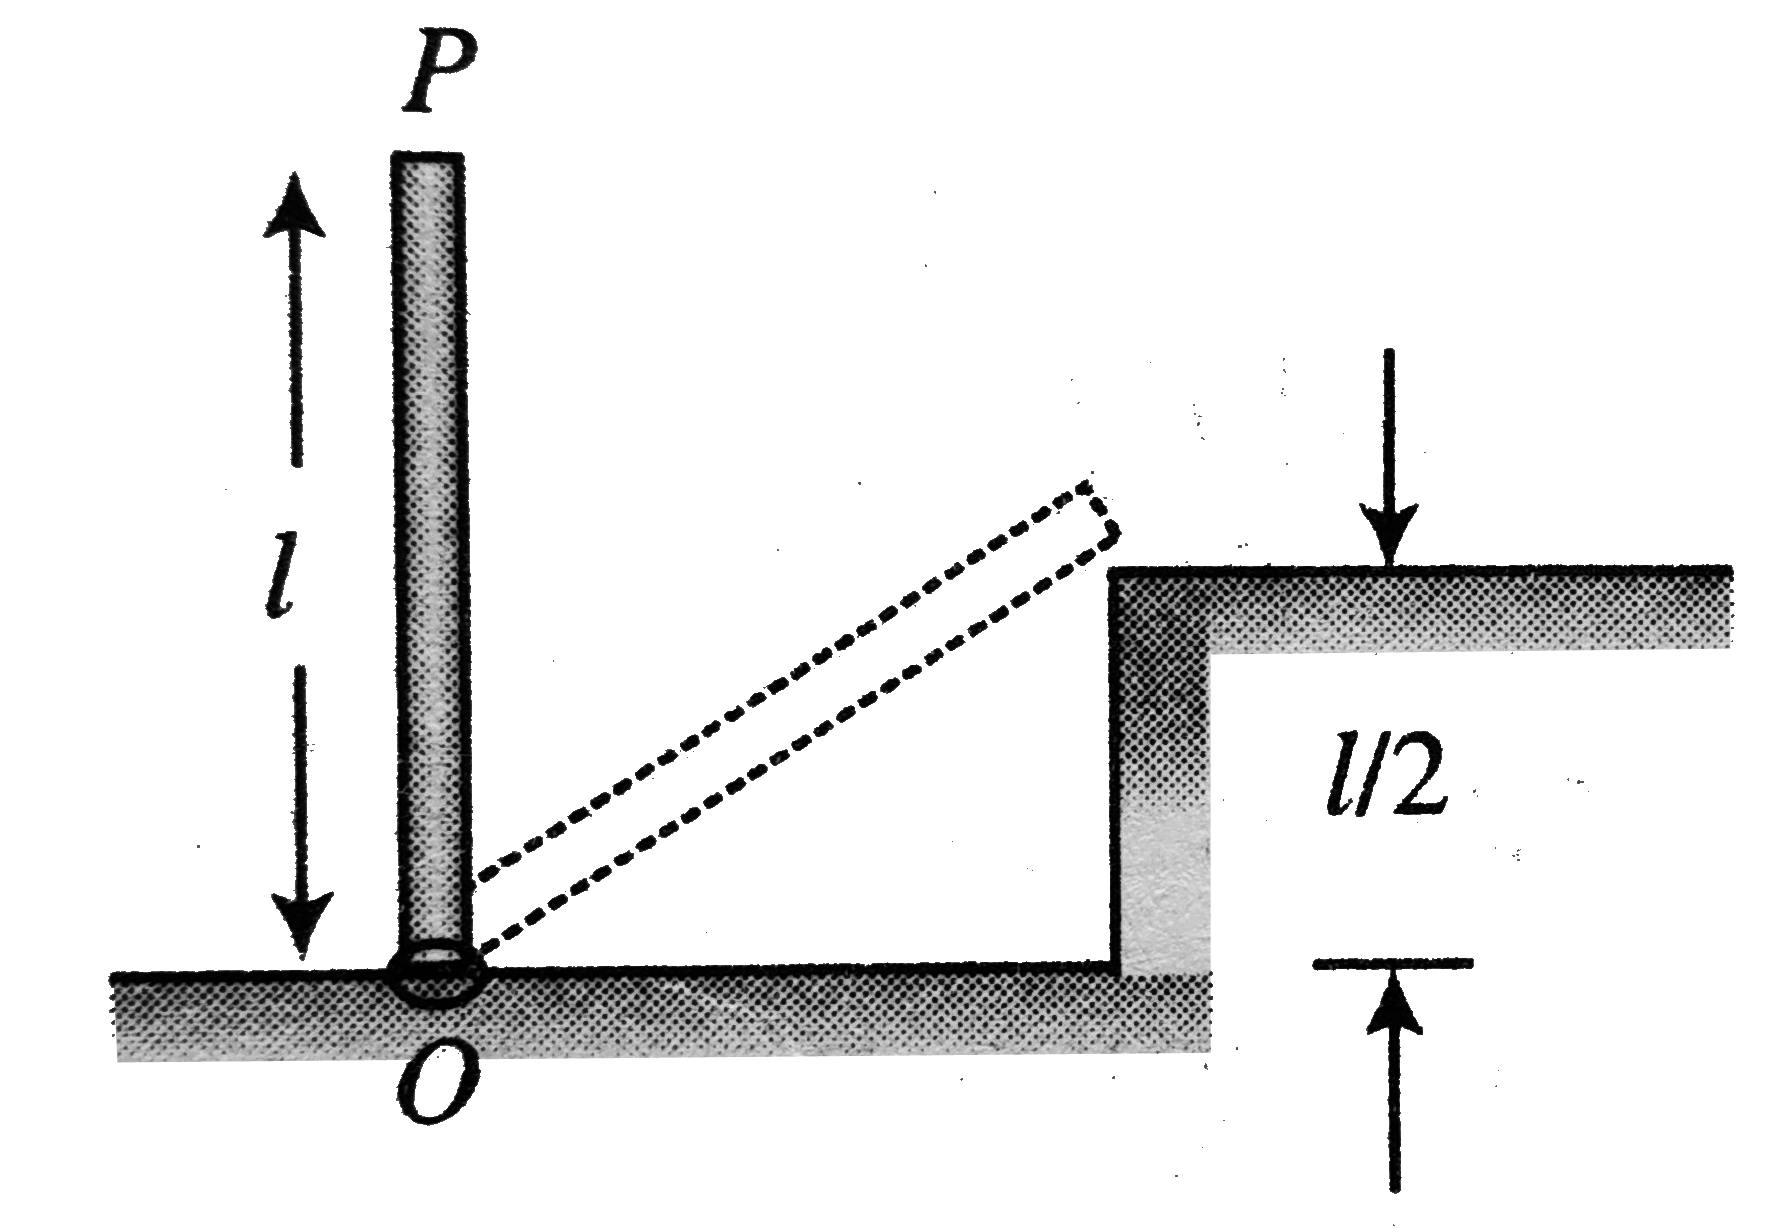 A uniform rod of mass m and length l is released from rest from its vertical position by giving a gently push. In consequence, the end of the rod collides at P after rotating about the smooth horizontal axis O. If the coefficient of restitution e = (1/2). Find the: a. angular speed of the rod just after the impact.      b. energy loss during collision. c. maximum angle rotated by rod after collision.